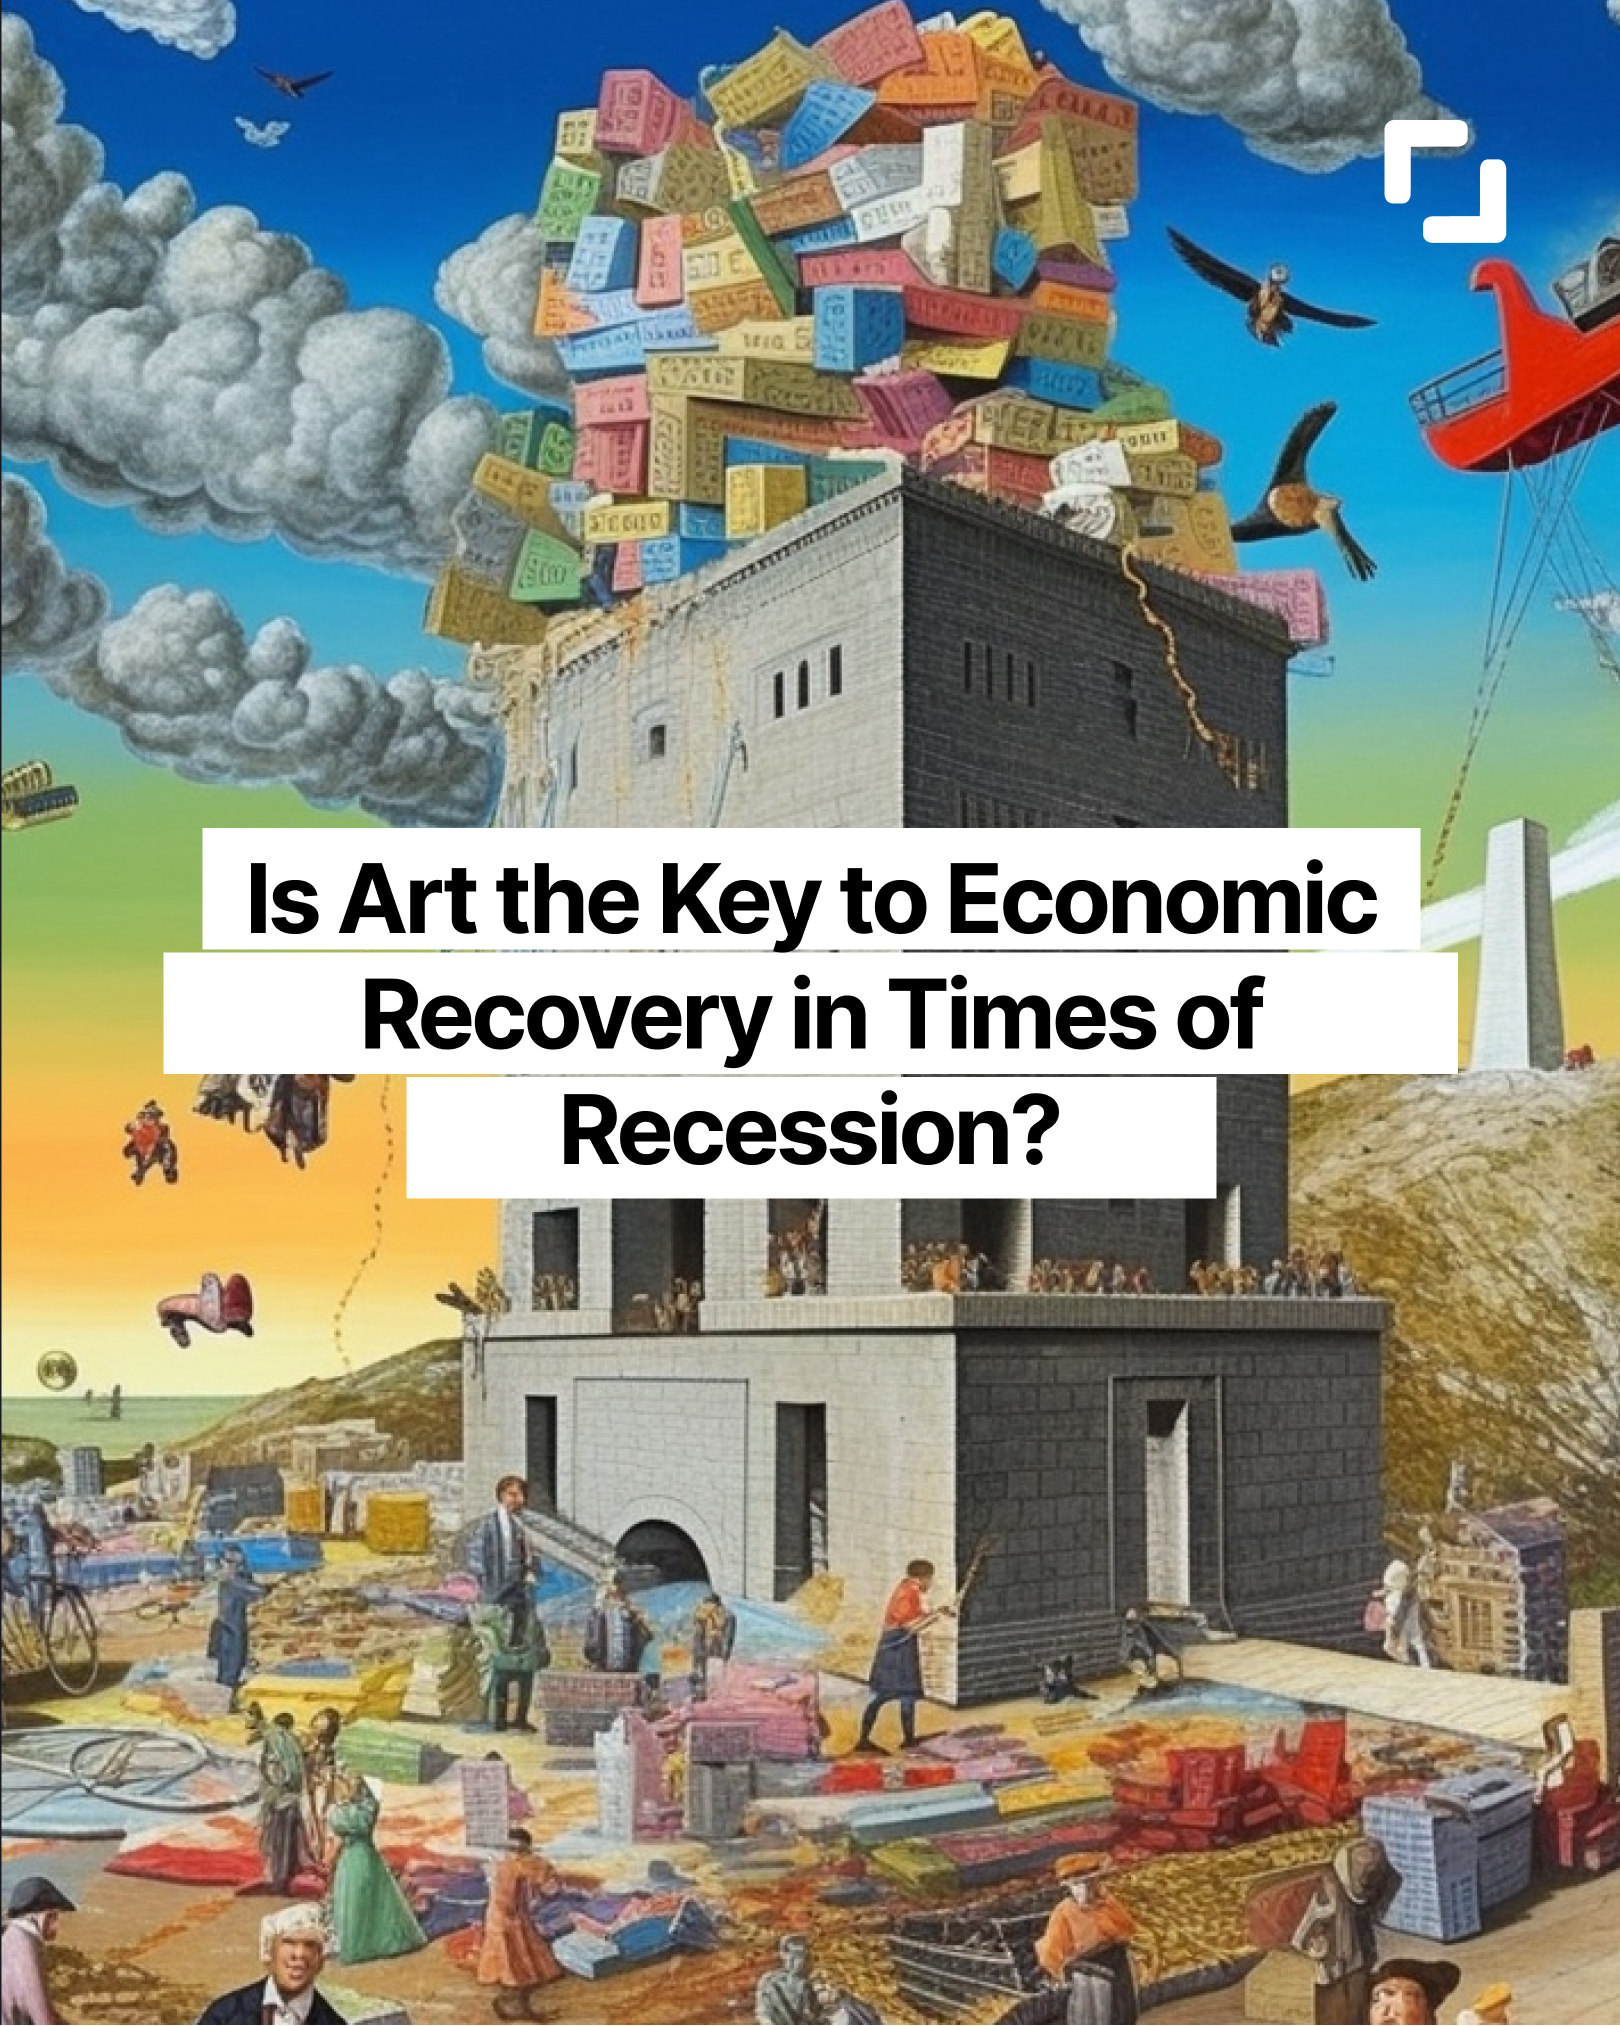 Is Art the Key to Economic Recovery in Times of Recession?